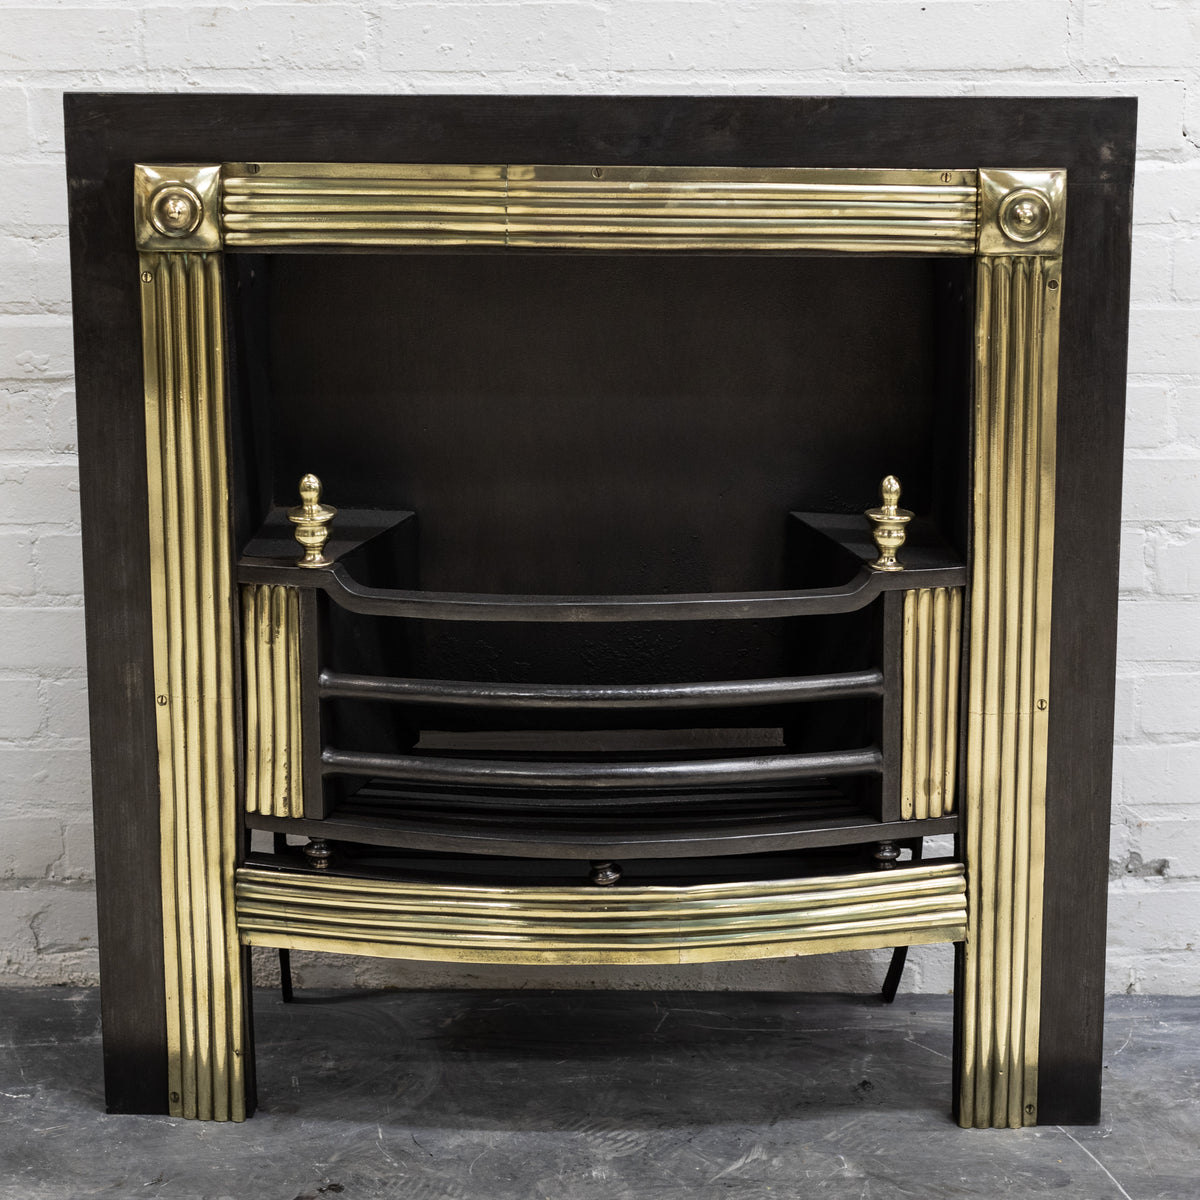 Splendid Antique Regency Hob Grate with Reeded Brass Frame | The Architectural Forum